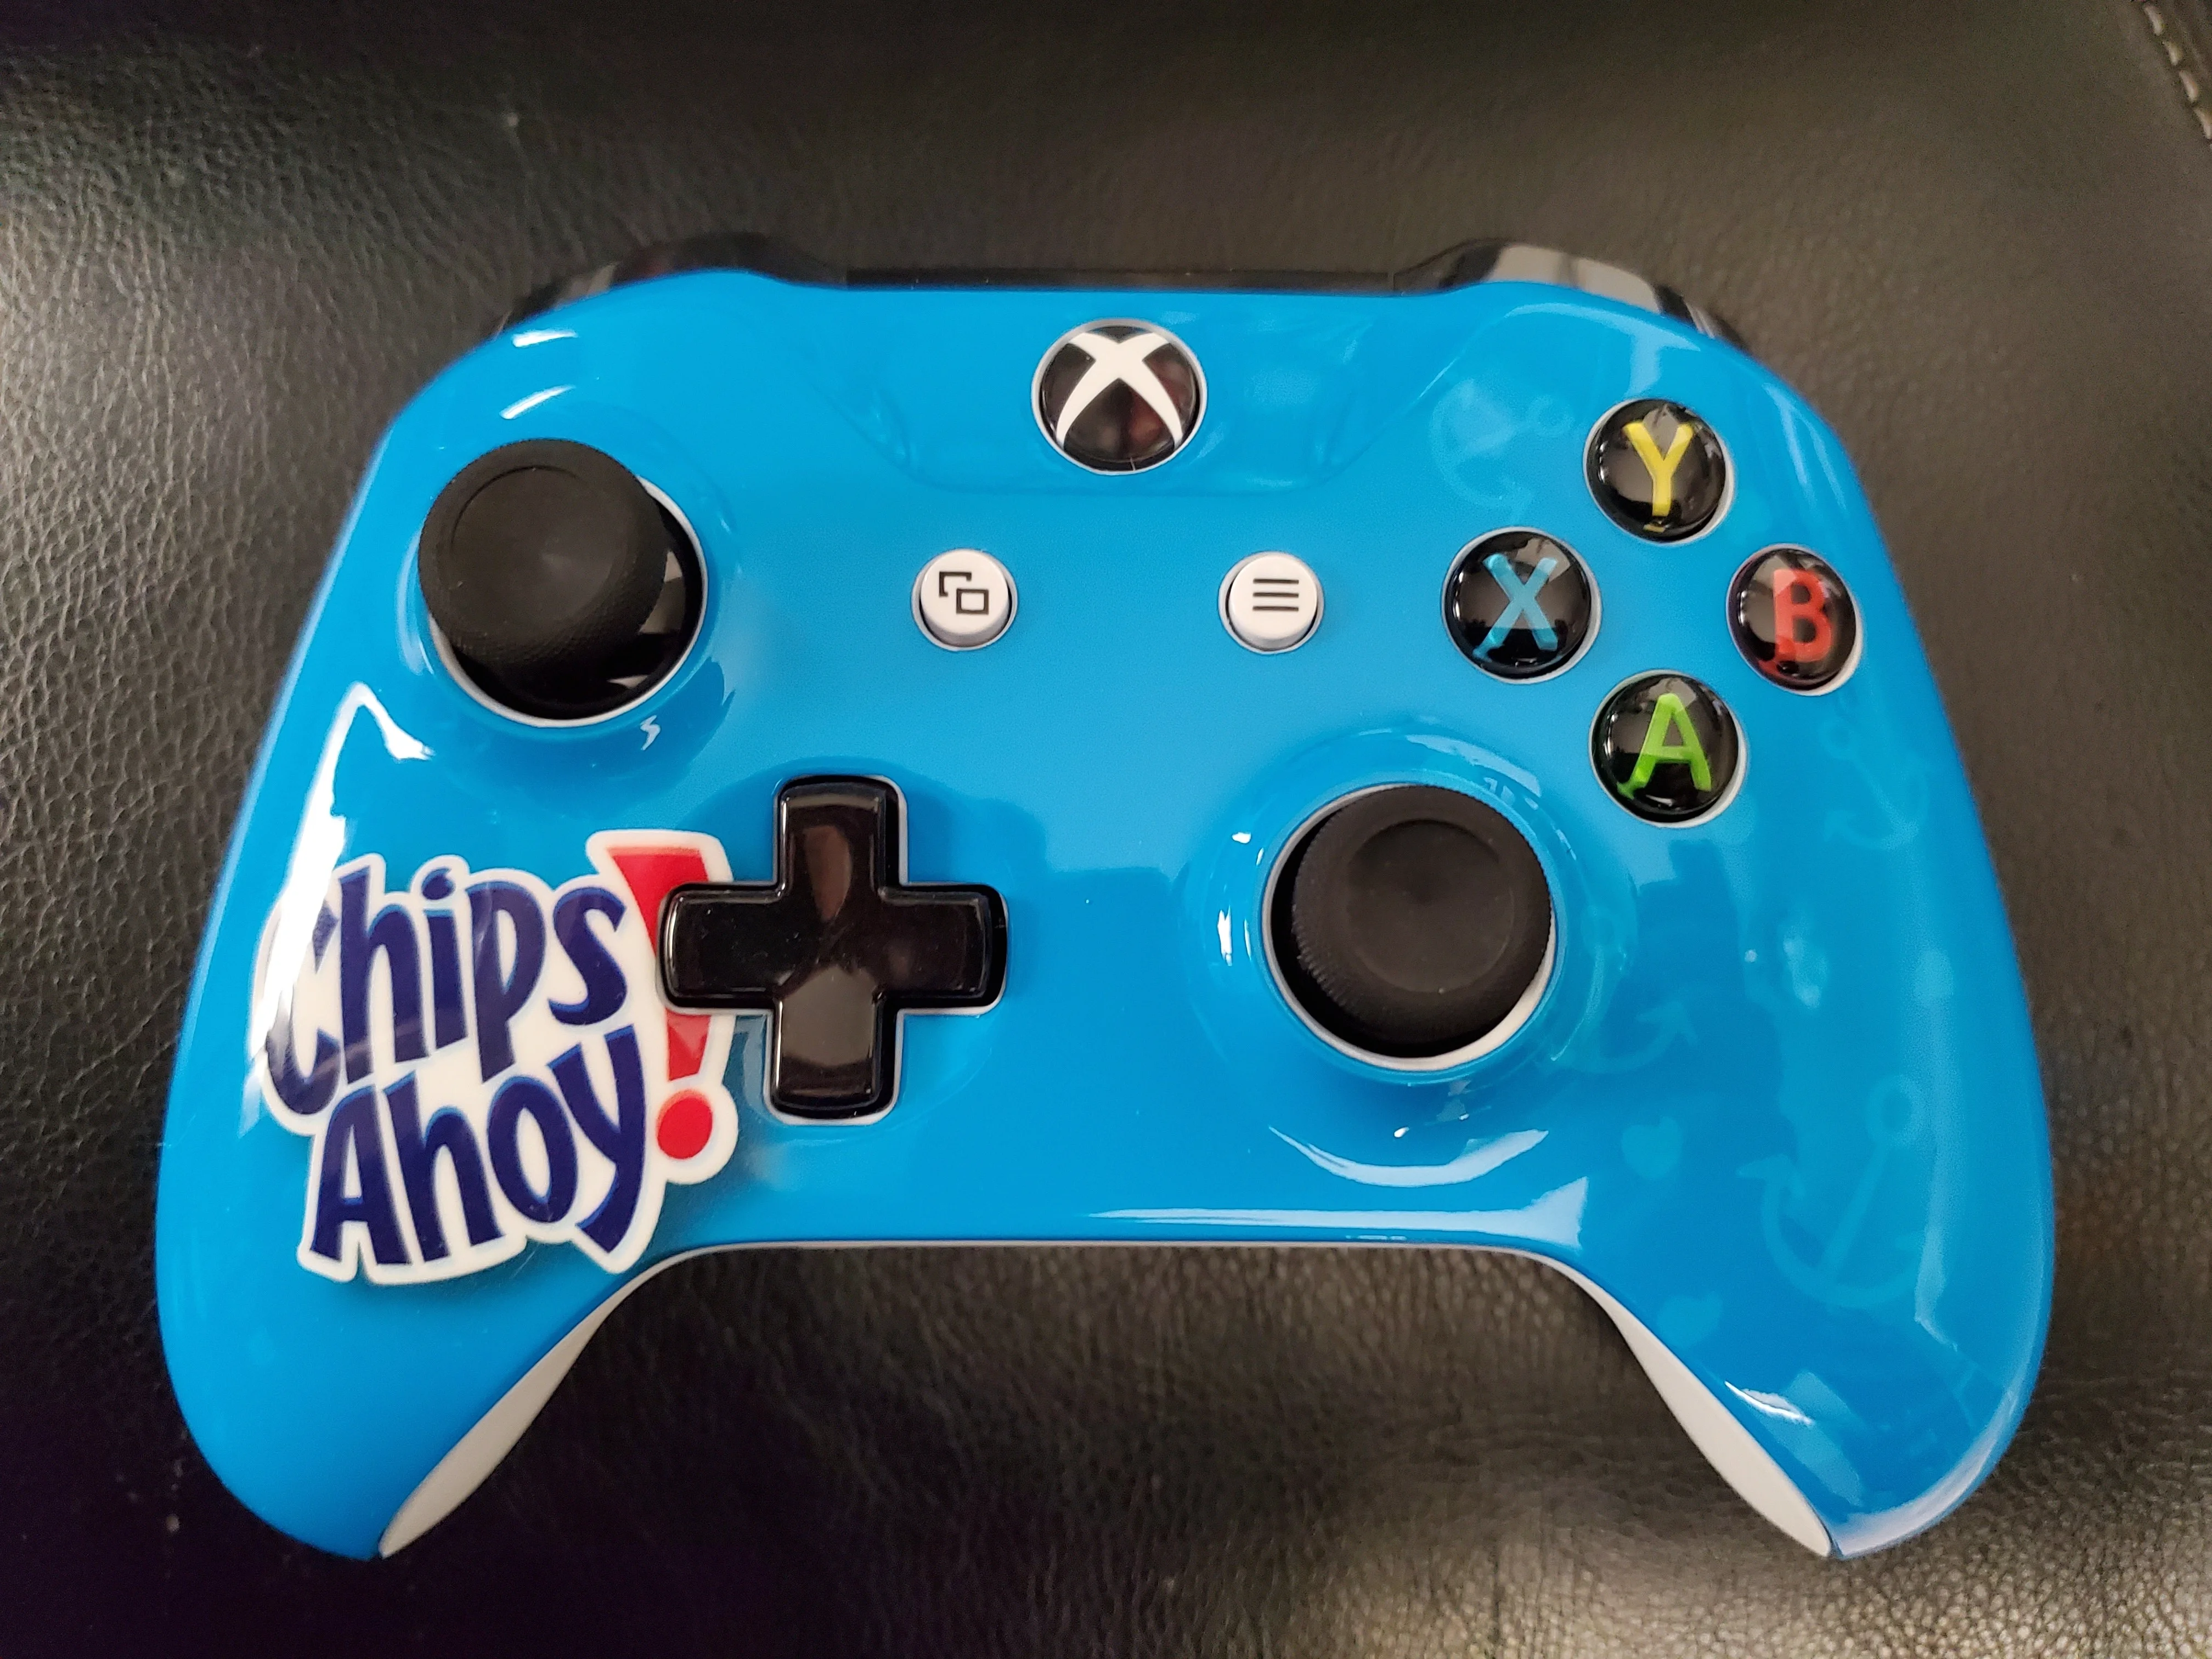  Microsoft Xbox One S Chips Ahoy! Controller